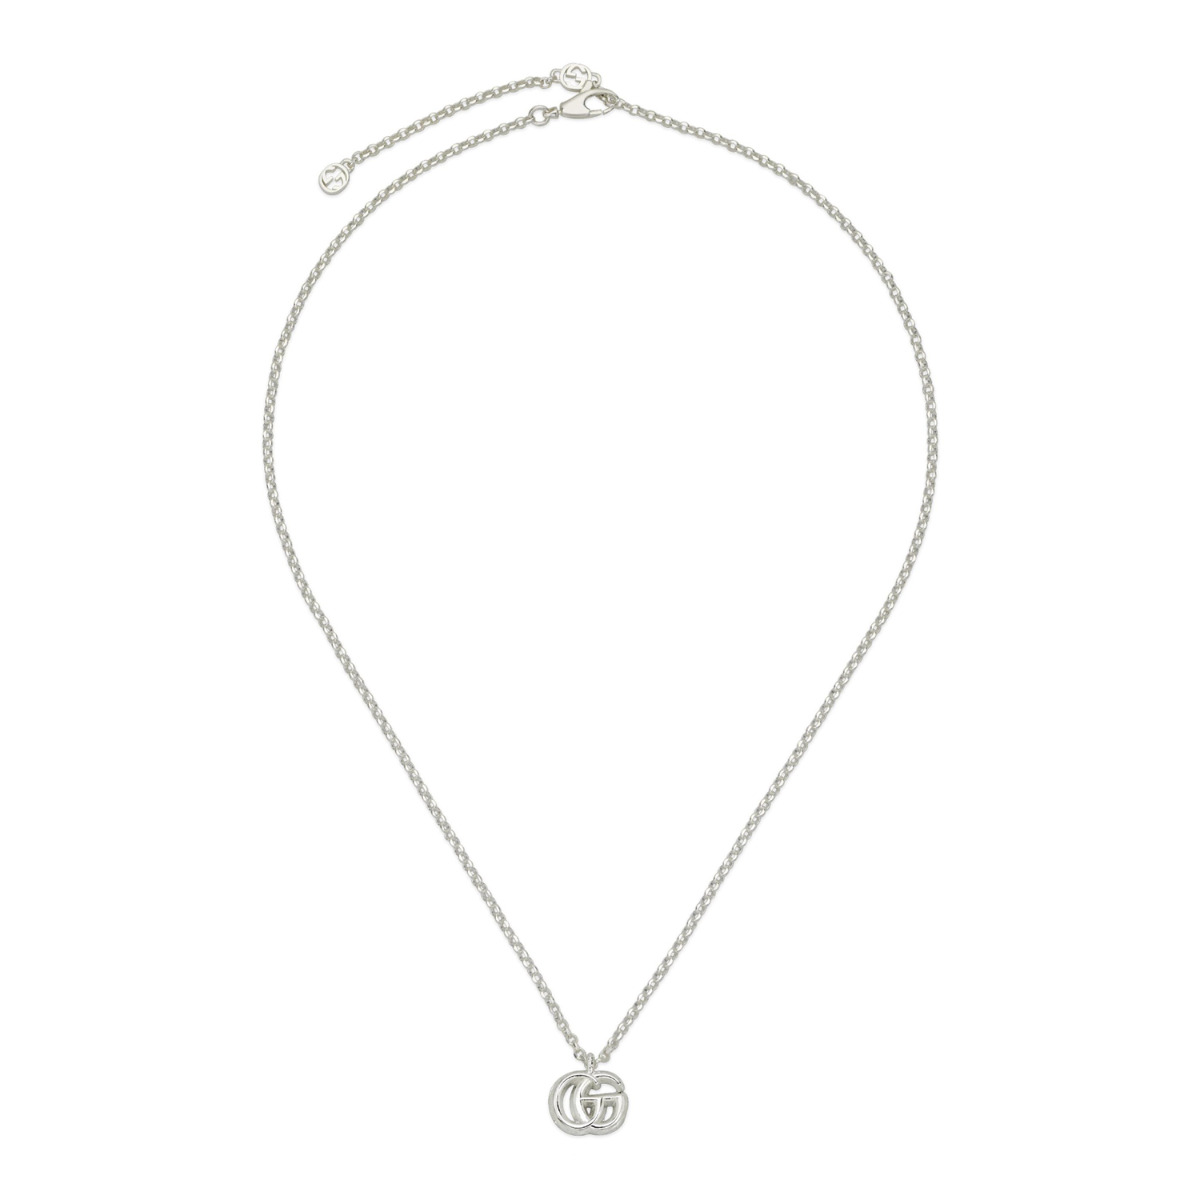 Gucci "GG Marmont" Sterling Silver Necklace